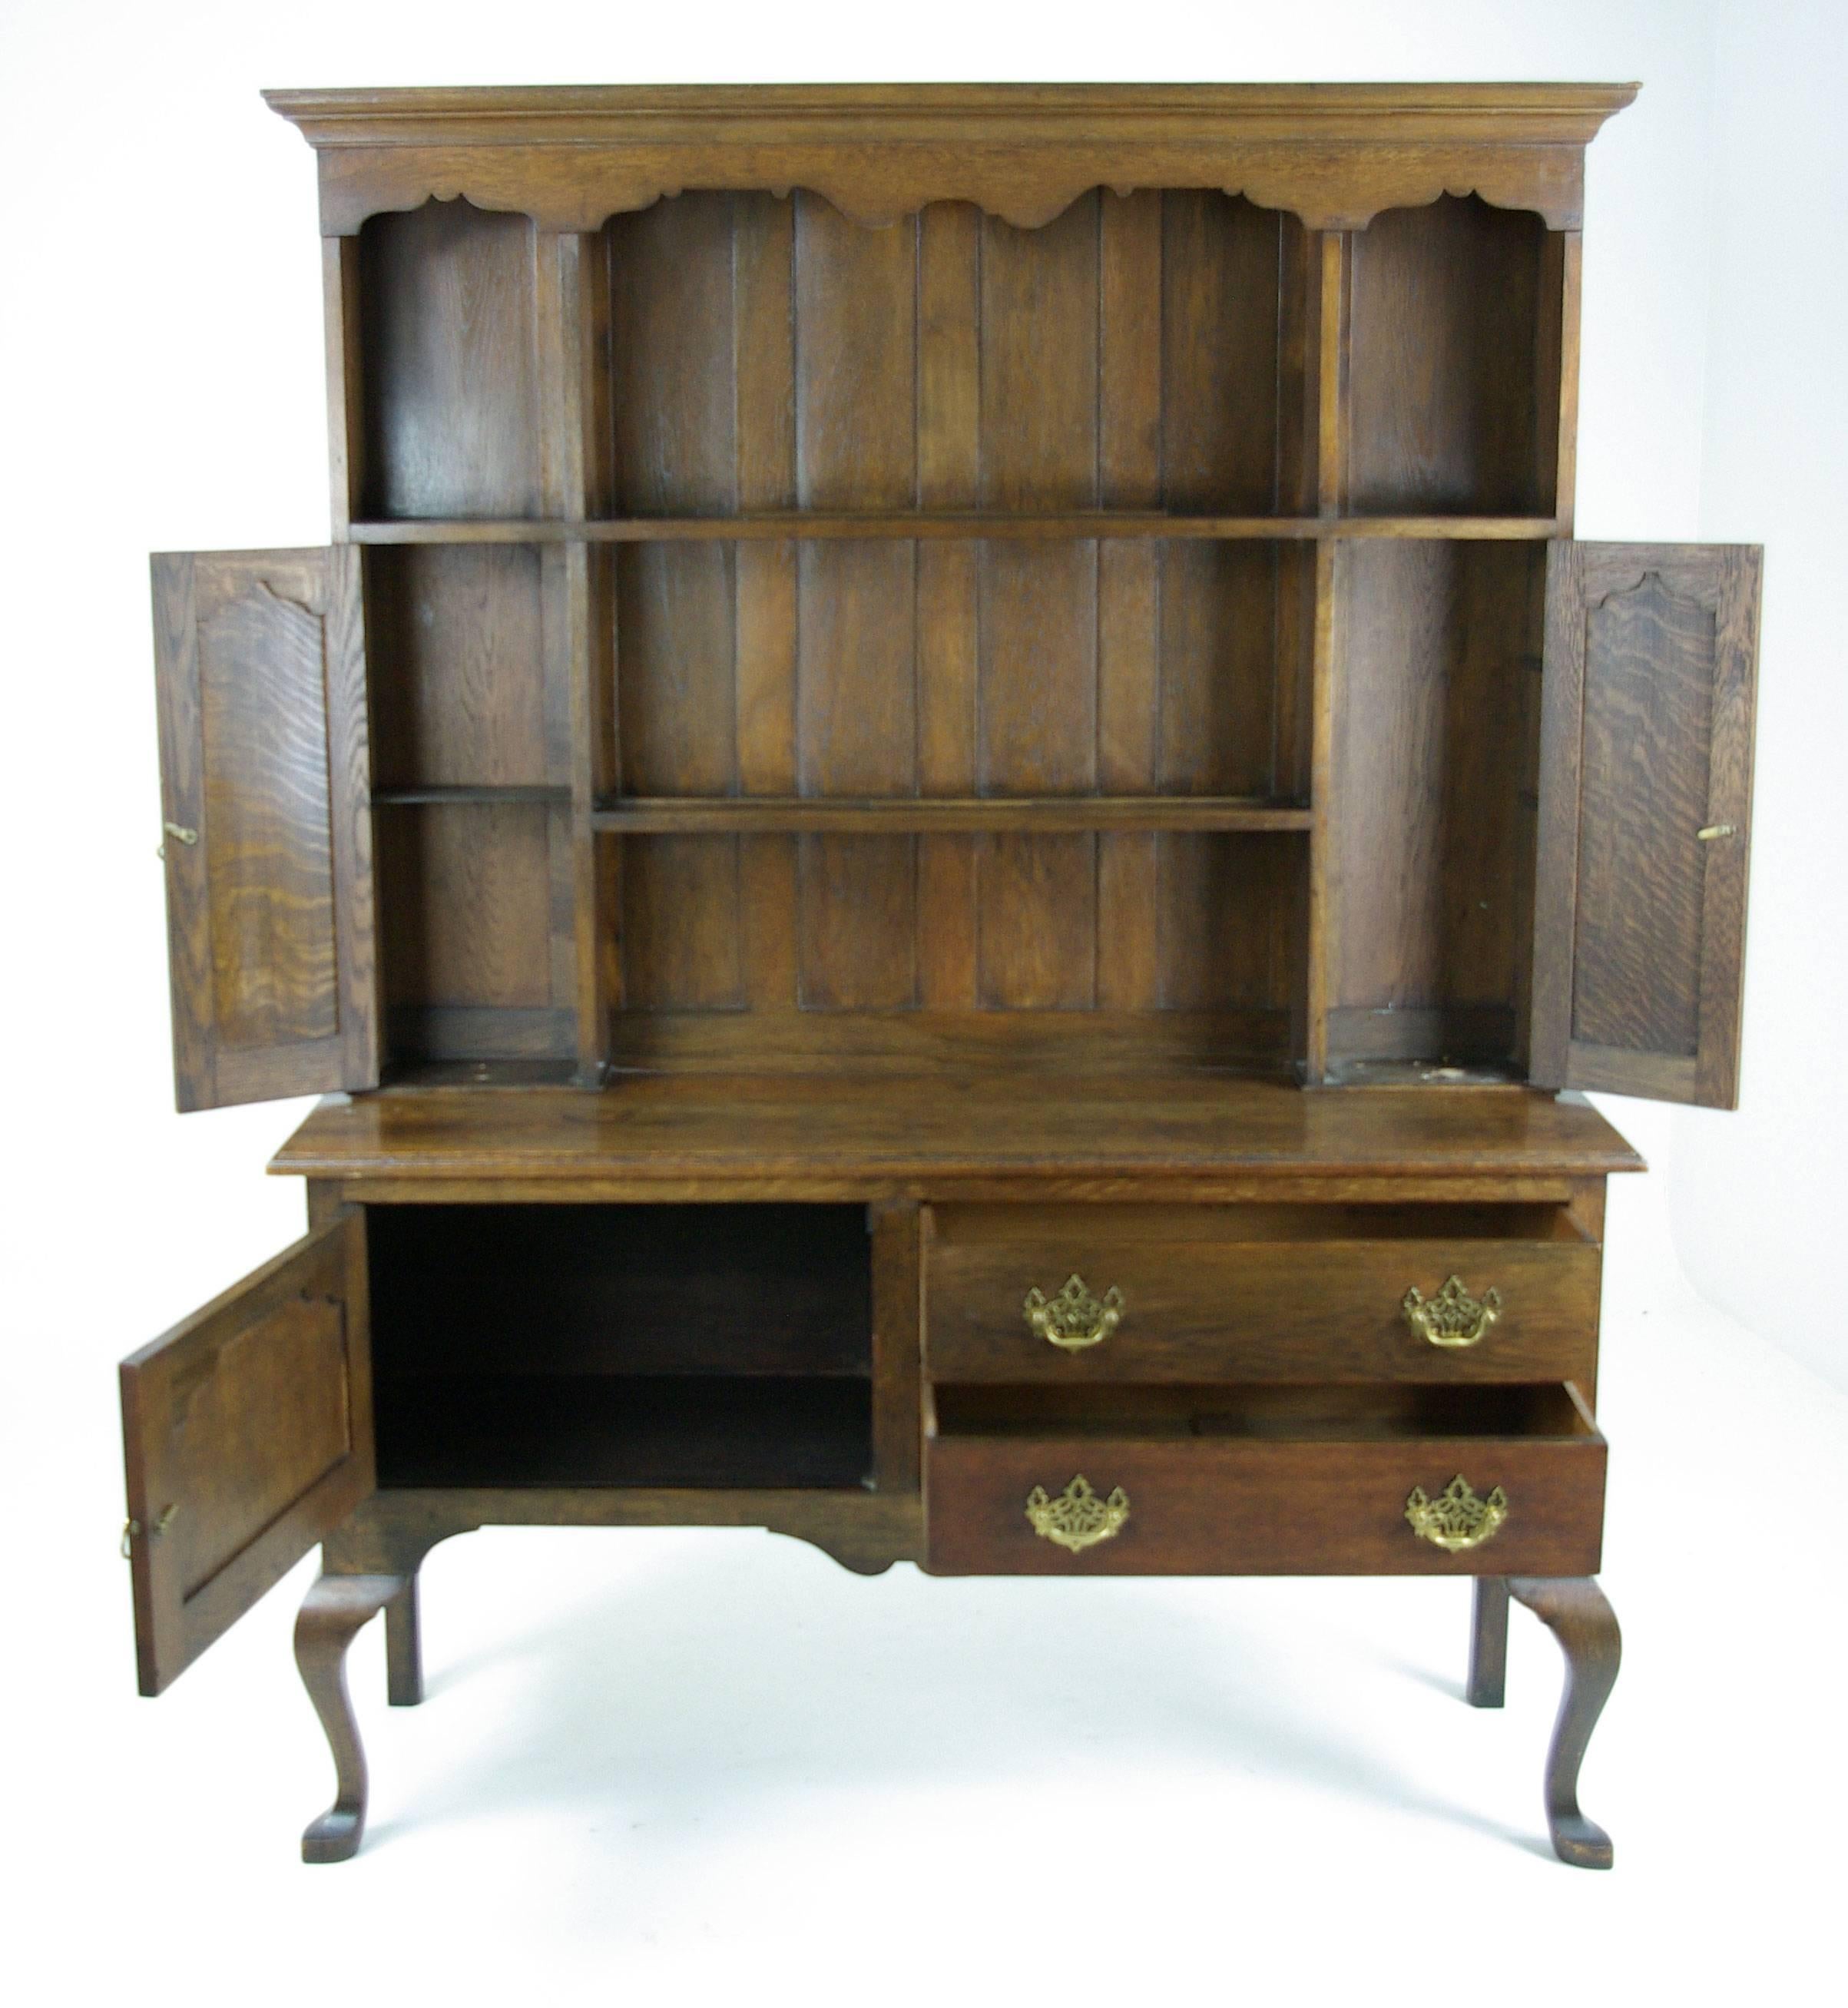 Scotland,
1890.
Solid oak, original finish.
Traditional top with open plate rack.
Base with single door and two drawers.
Original hardware.
Ending on cabriole legs.

$1850.

Base 59